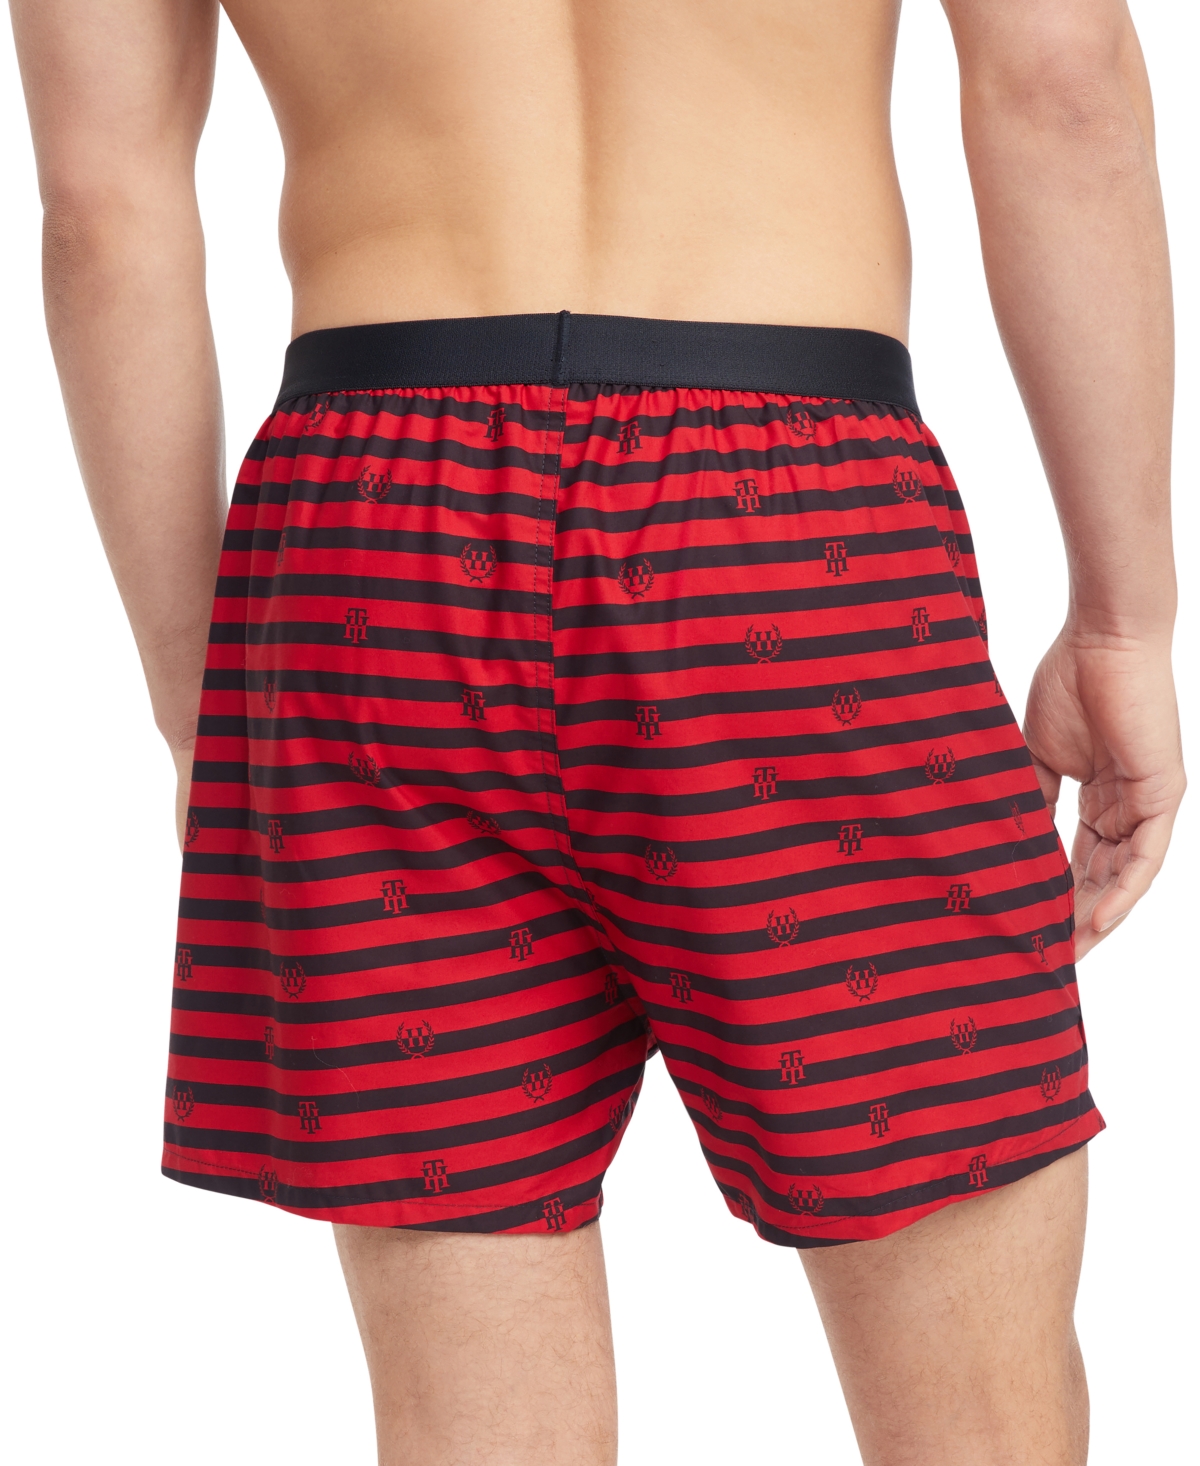 Shop Tommy Hilfiger Men's Striped Woven Boxers In Rogue